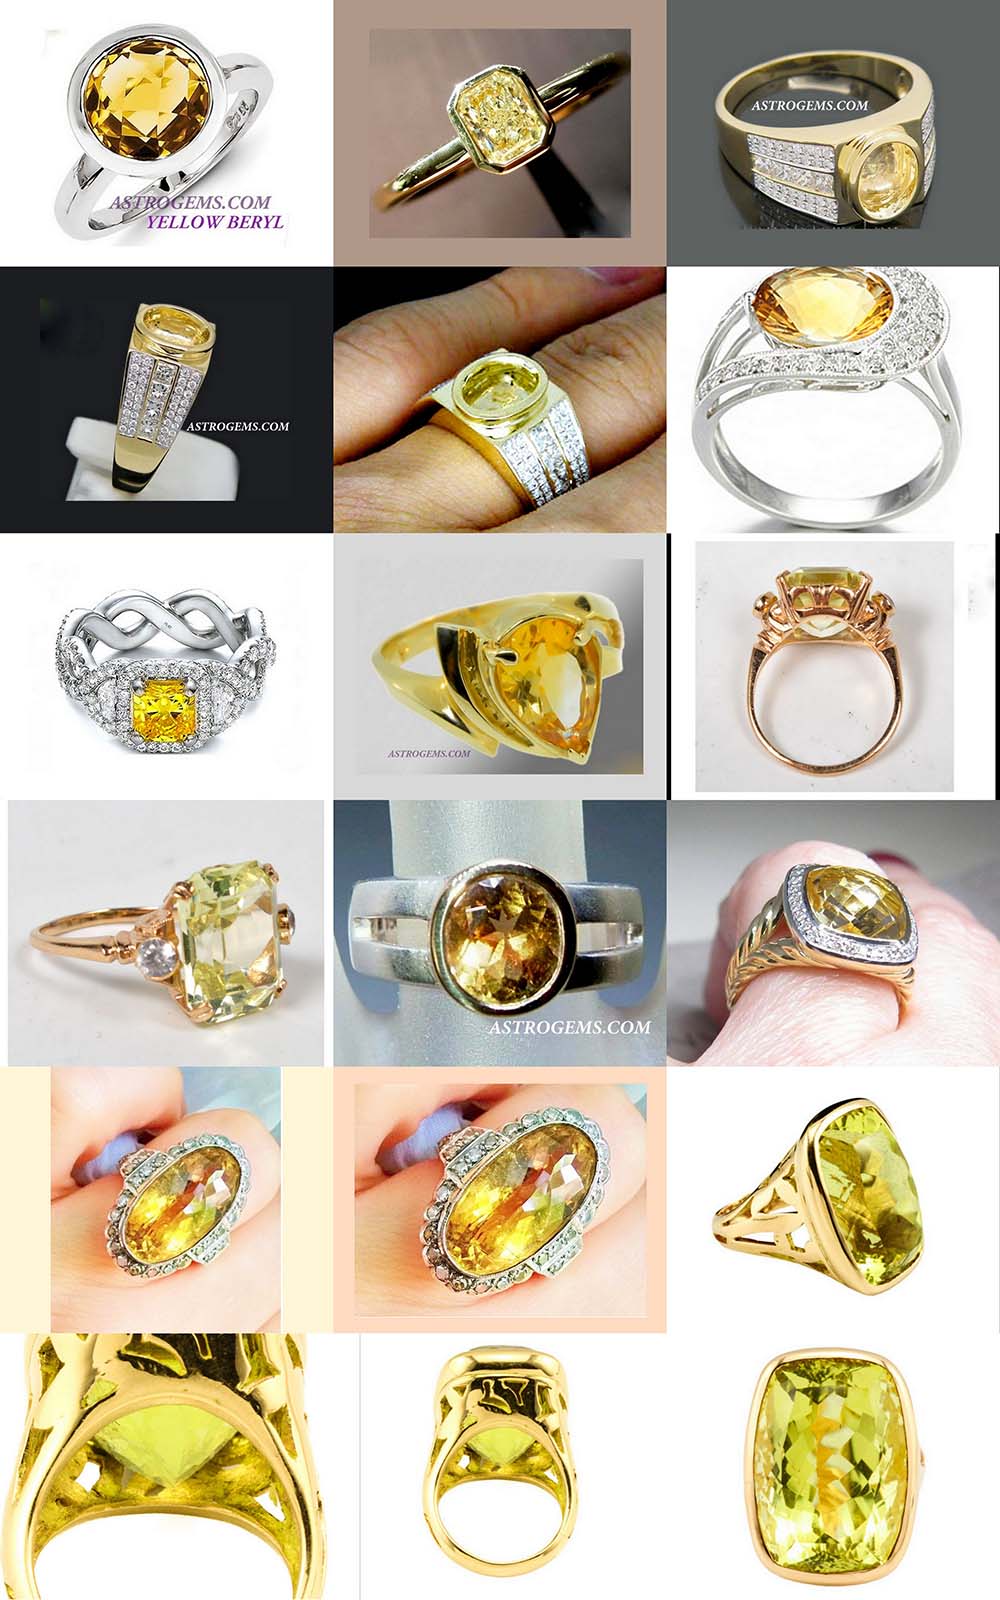 Astrogems can make jyotish astrological Yellow Sapphire rings in any style.